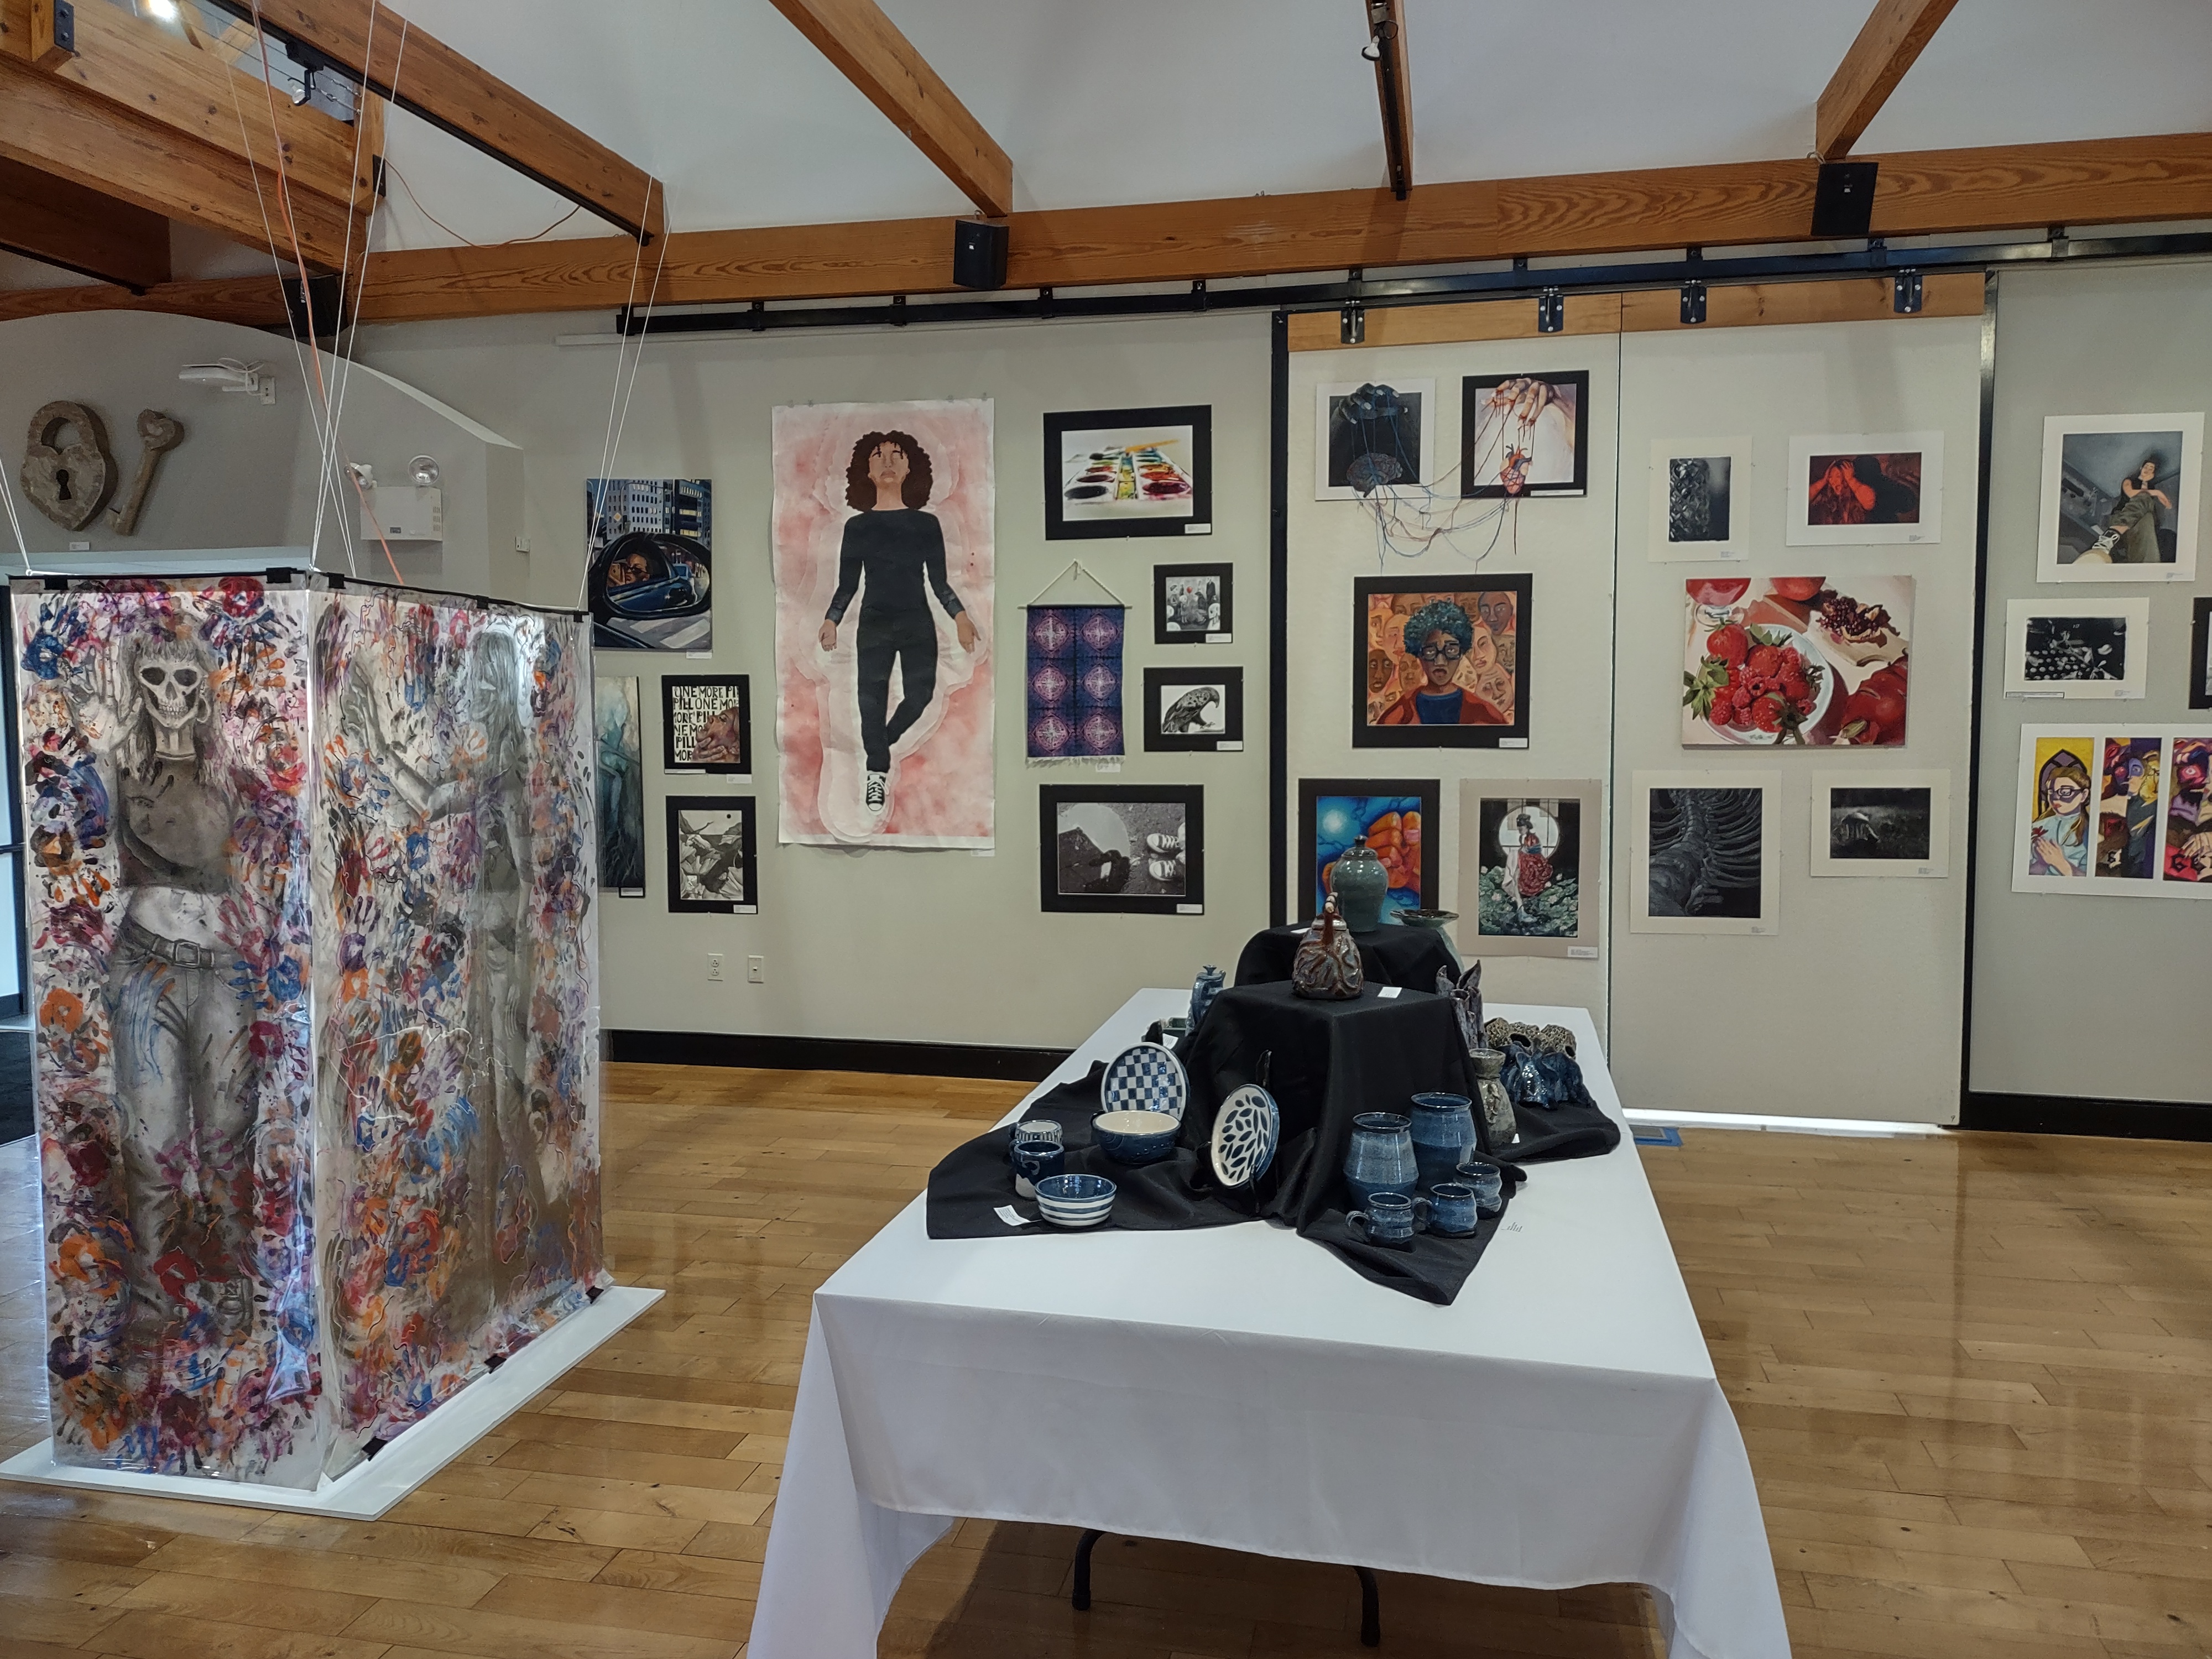 Artwork from high school students on display at the Blue Bell art gallery